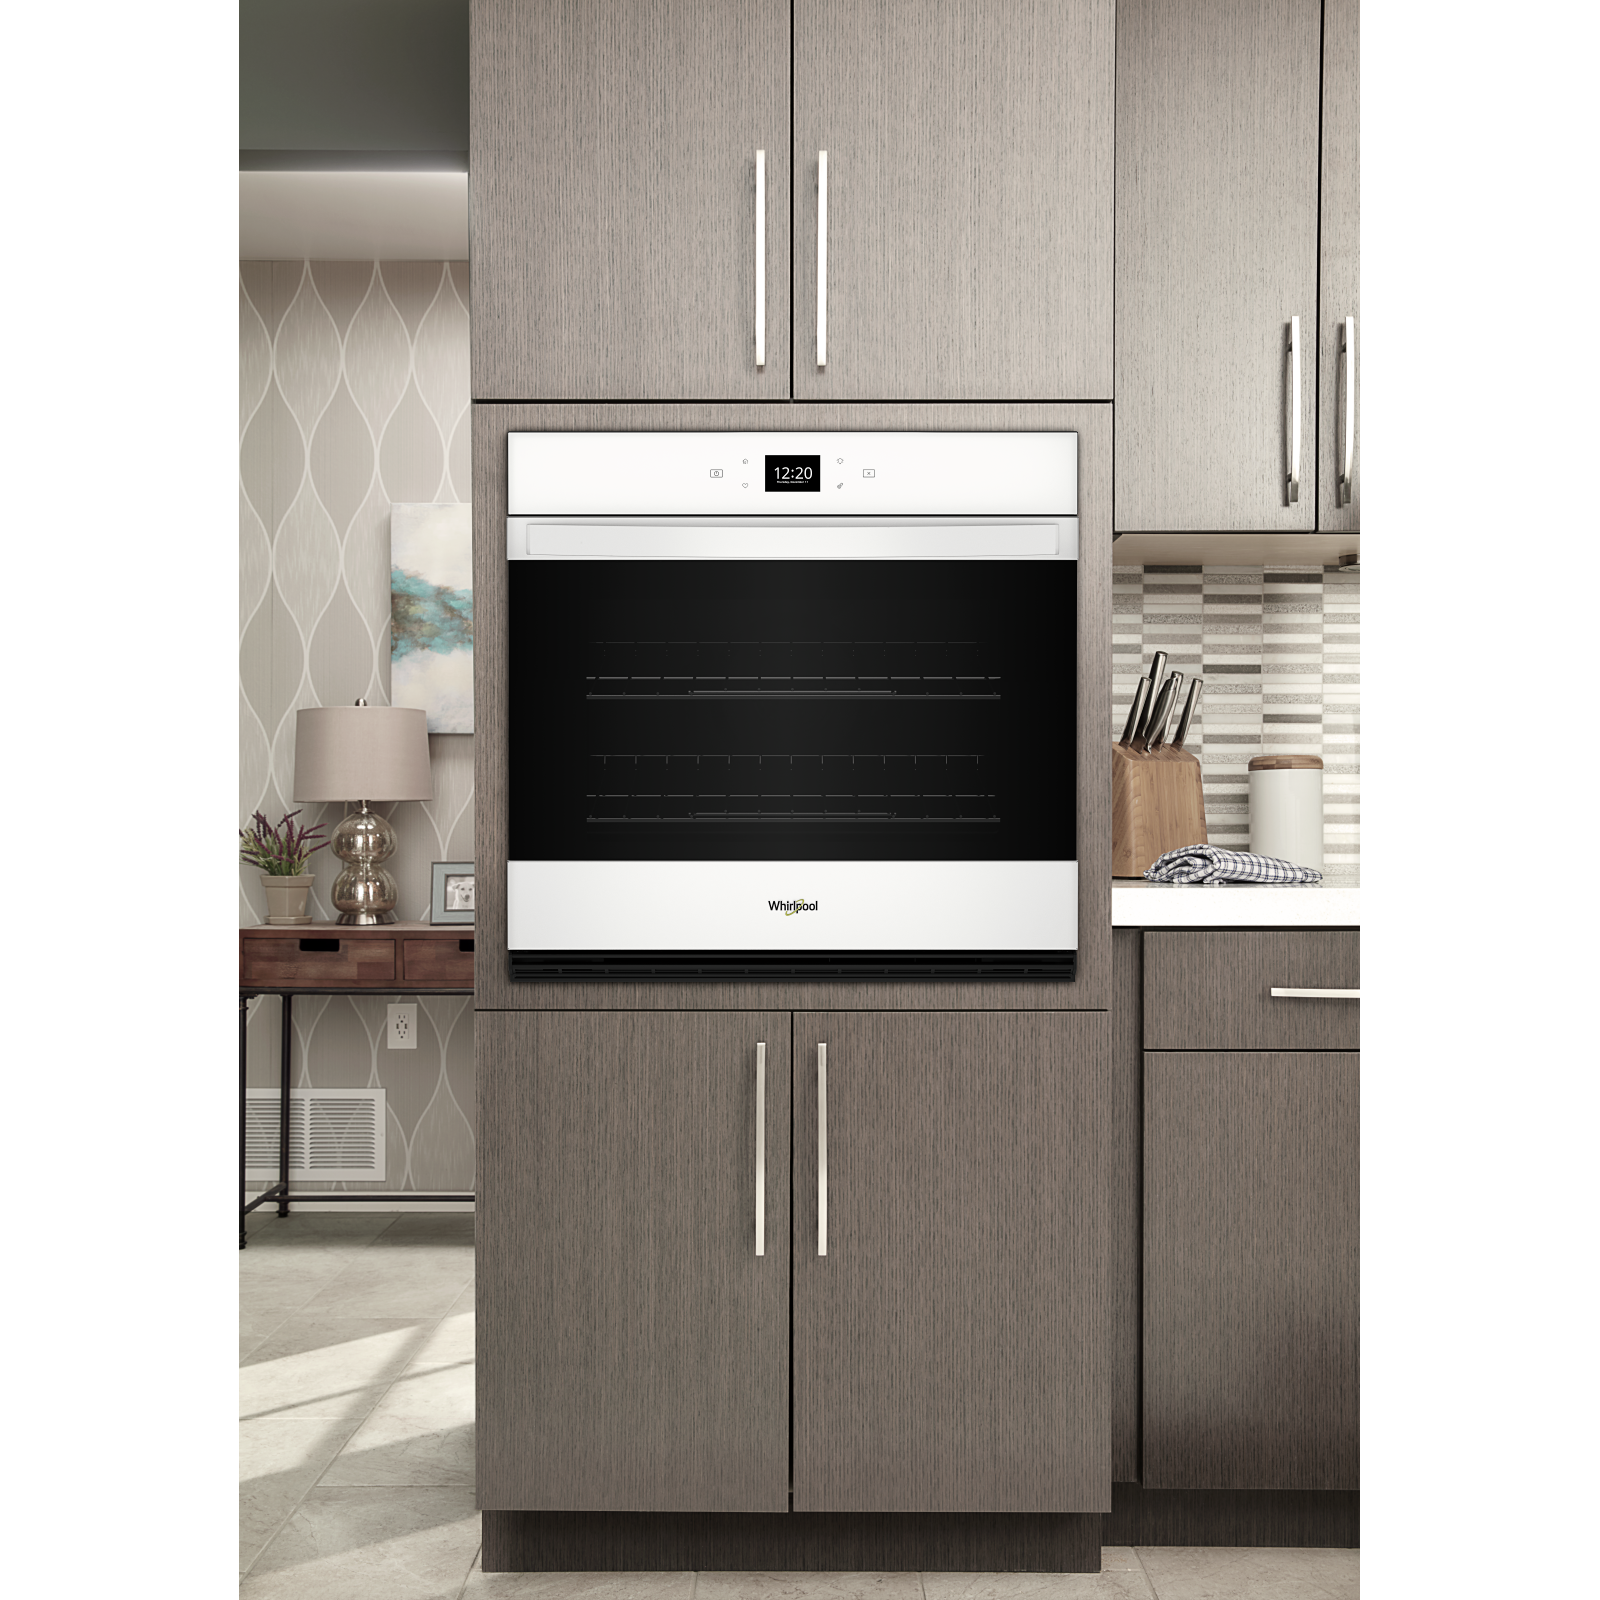 Whirlpool - 5 cu. ft Single Wall Oven in White - WOES5030LW